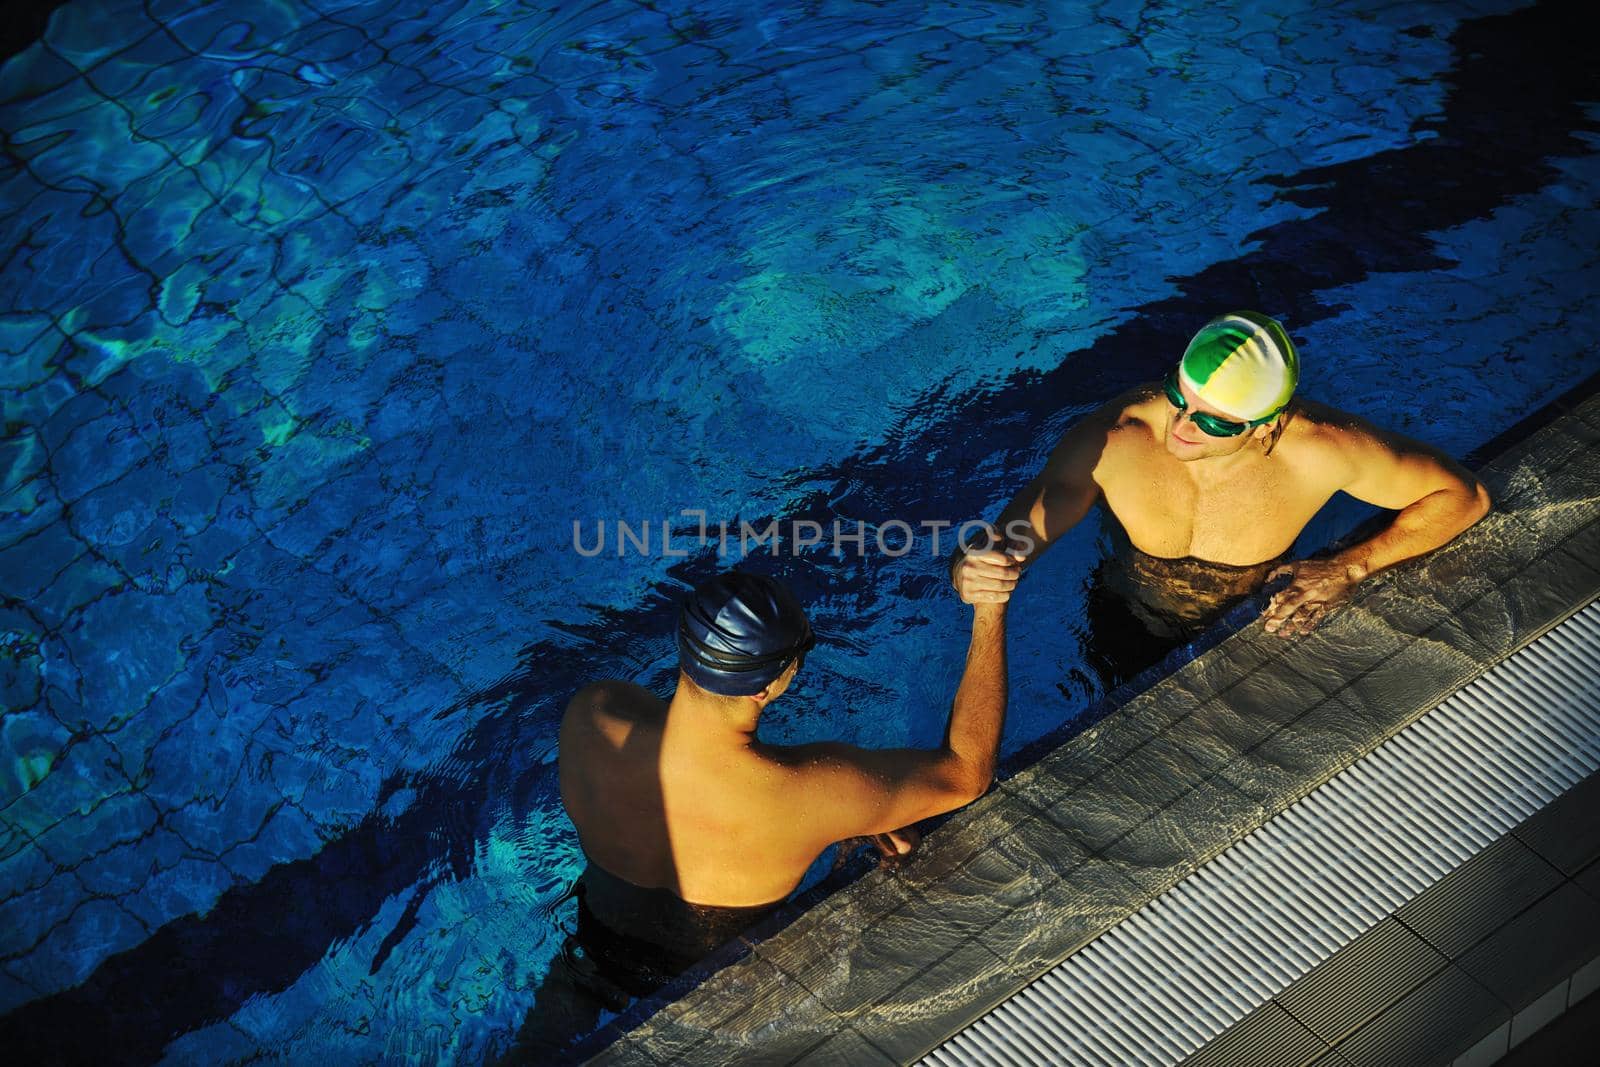 win competiotion and swimming race concept with two freiend who handshaking in pool